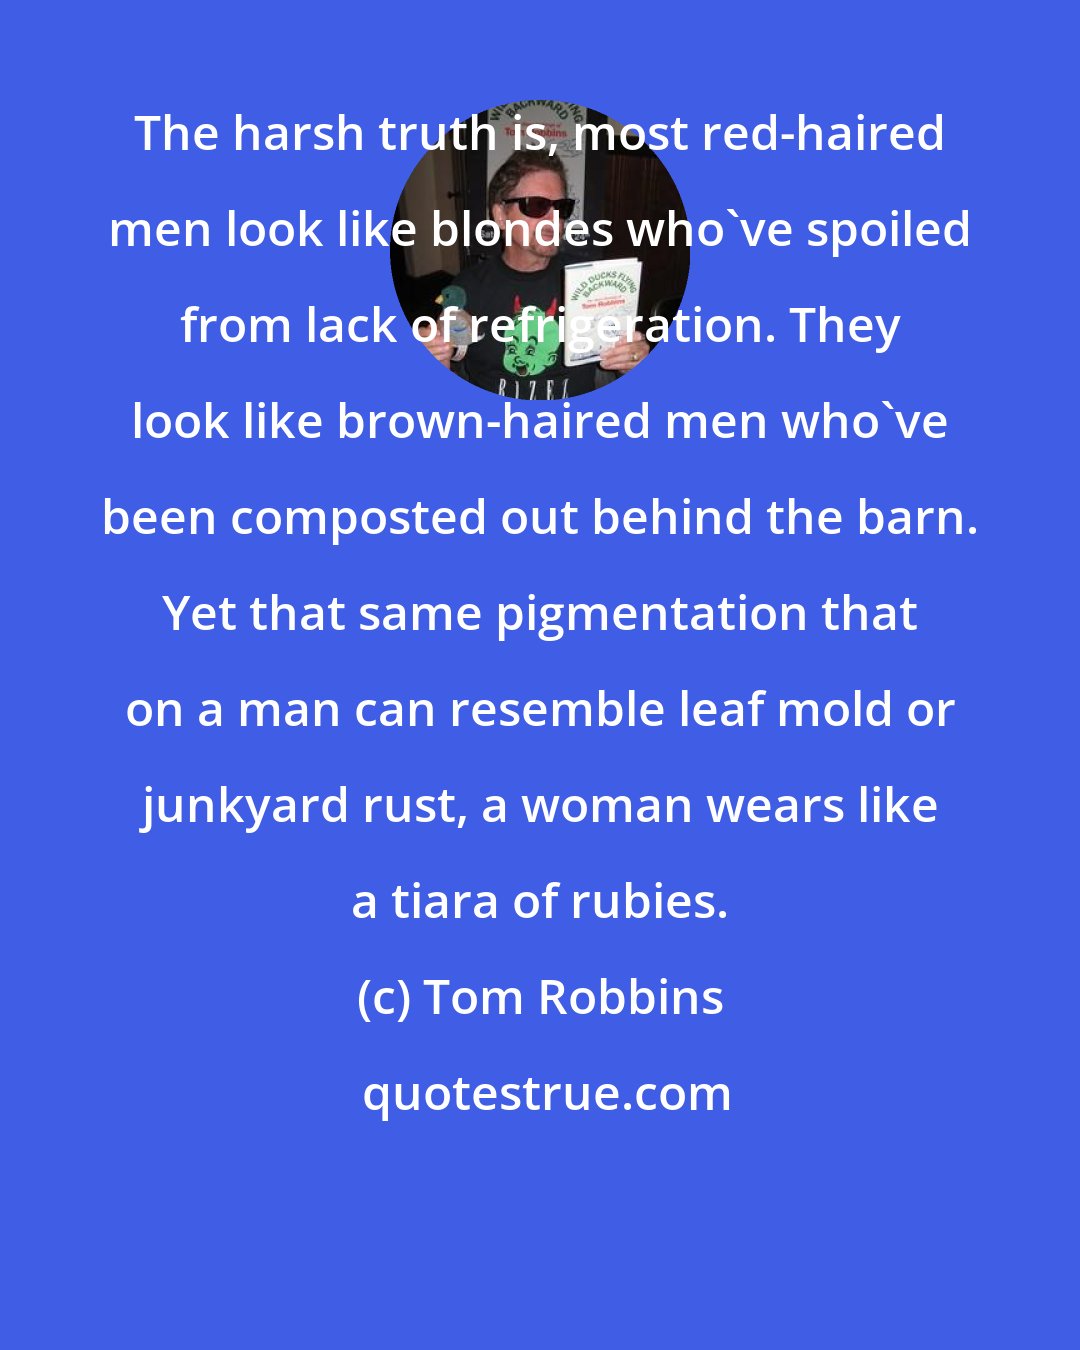 Tom Robbins: The harsh truth is, most red-haired men look like blondes who've spoiled from lack of refrigeration. They look like brown-haired men who've been composted out behind the barn. Yet that same pigmentation that on a man can resemble leaf mold or junkyard rust, a woman wears like a tiara of rubies.